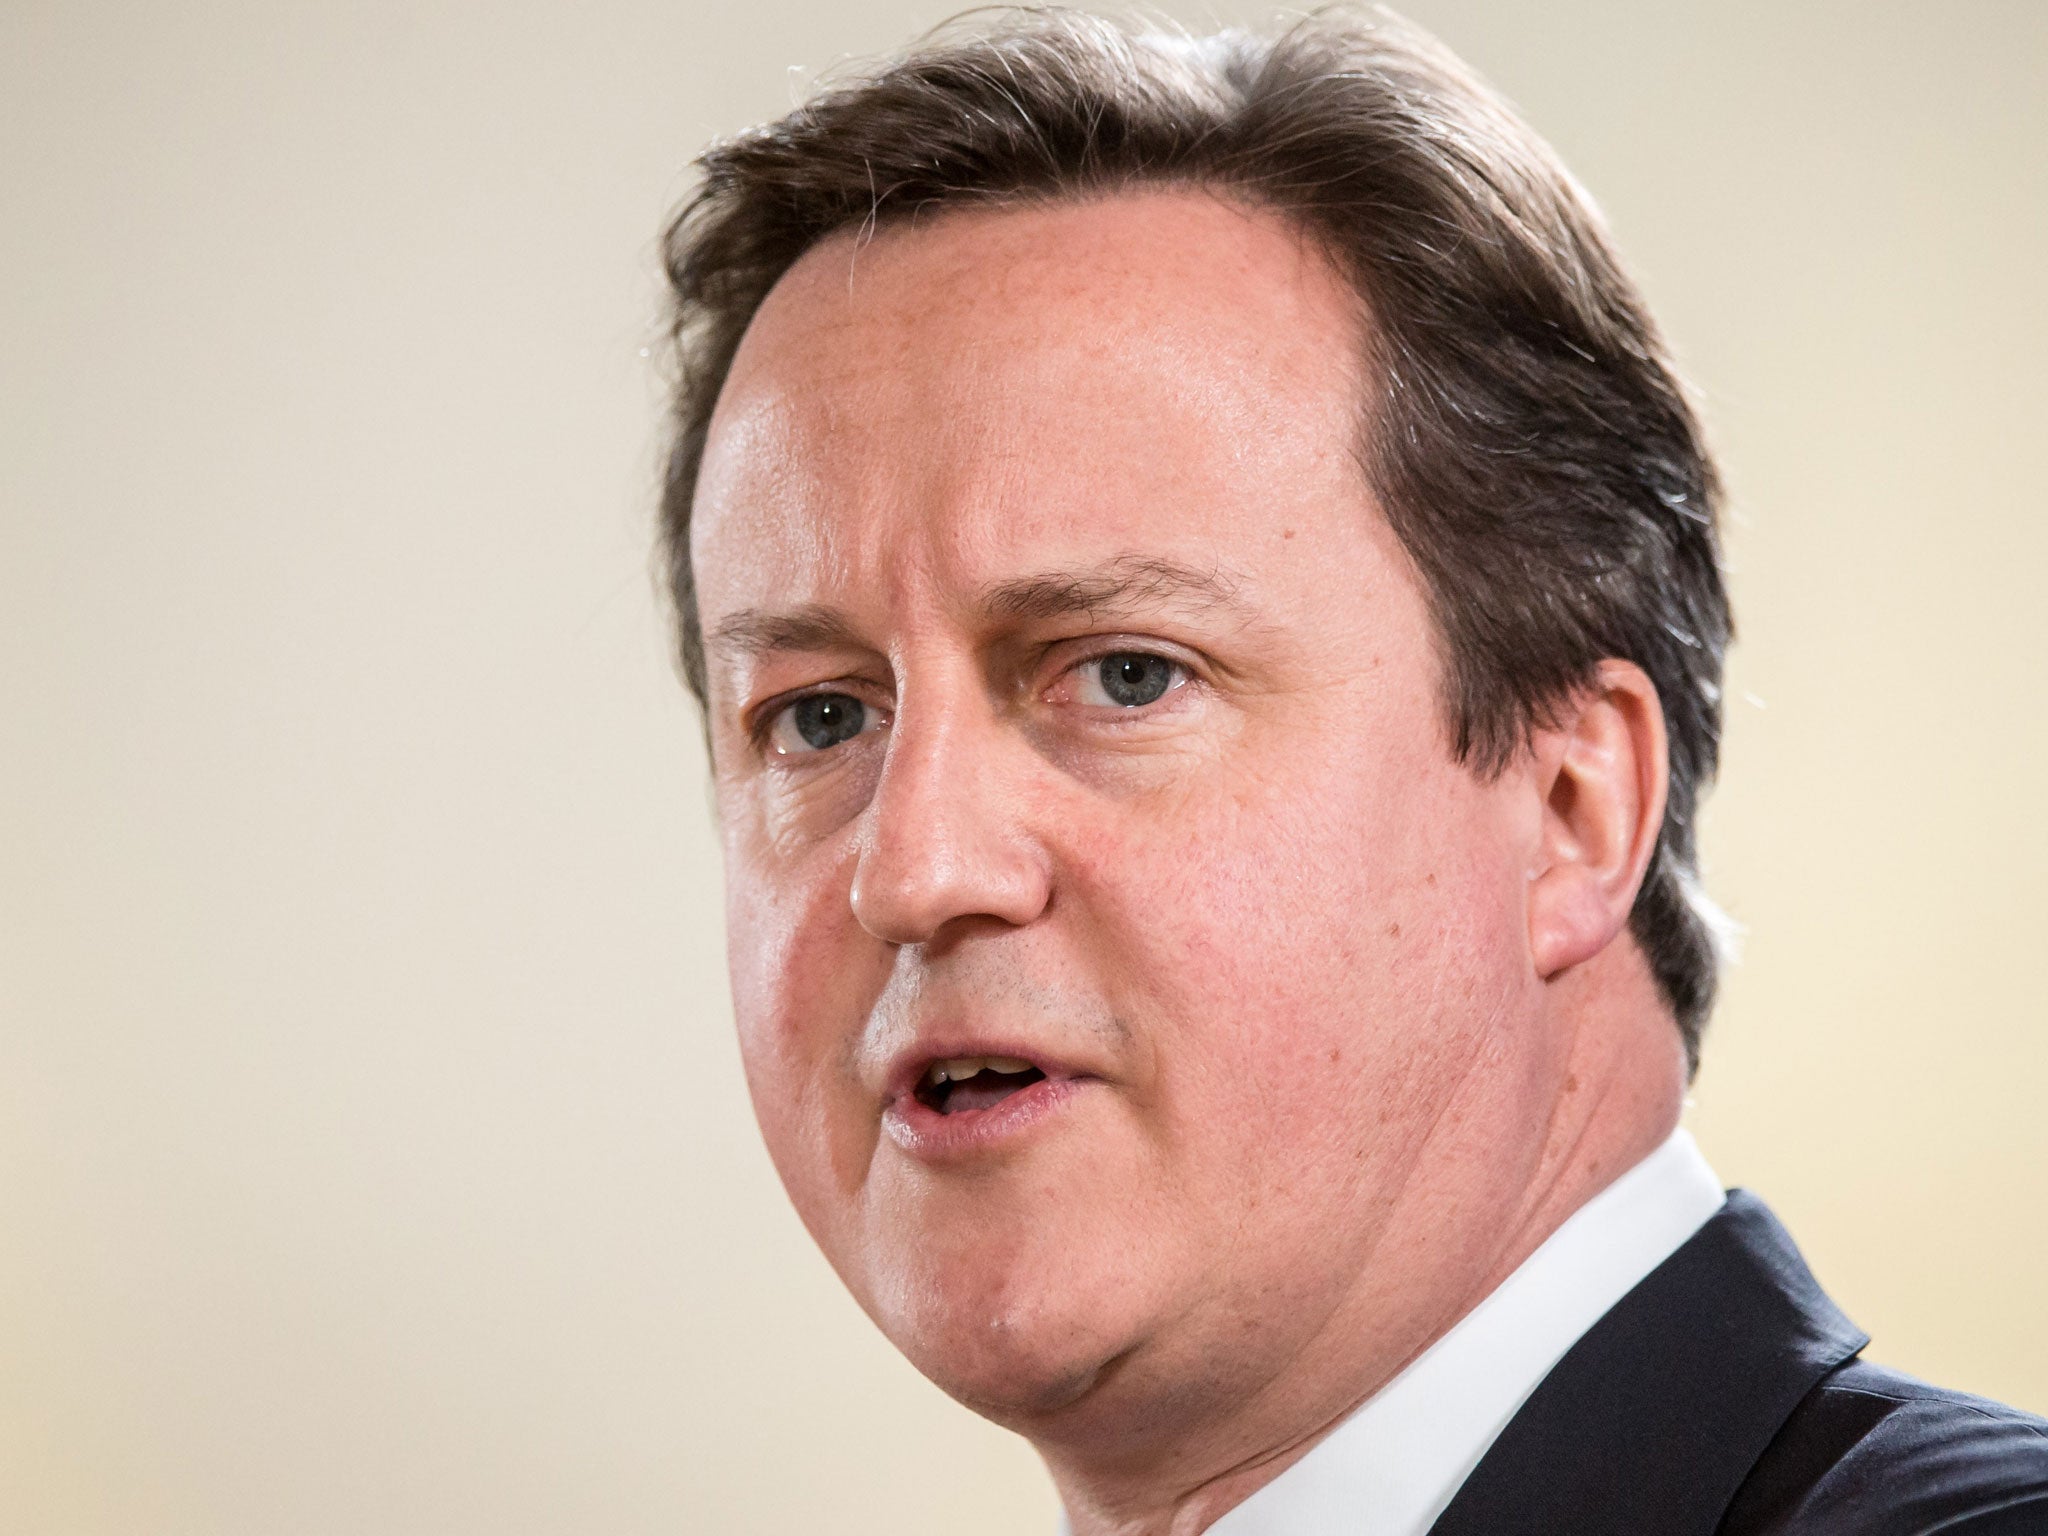 David Cameron was ranked joint fifth in a poll of 8 prime ministers, ahead of only Sir John Major and Gordon Brown